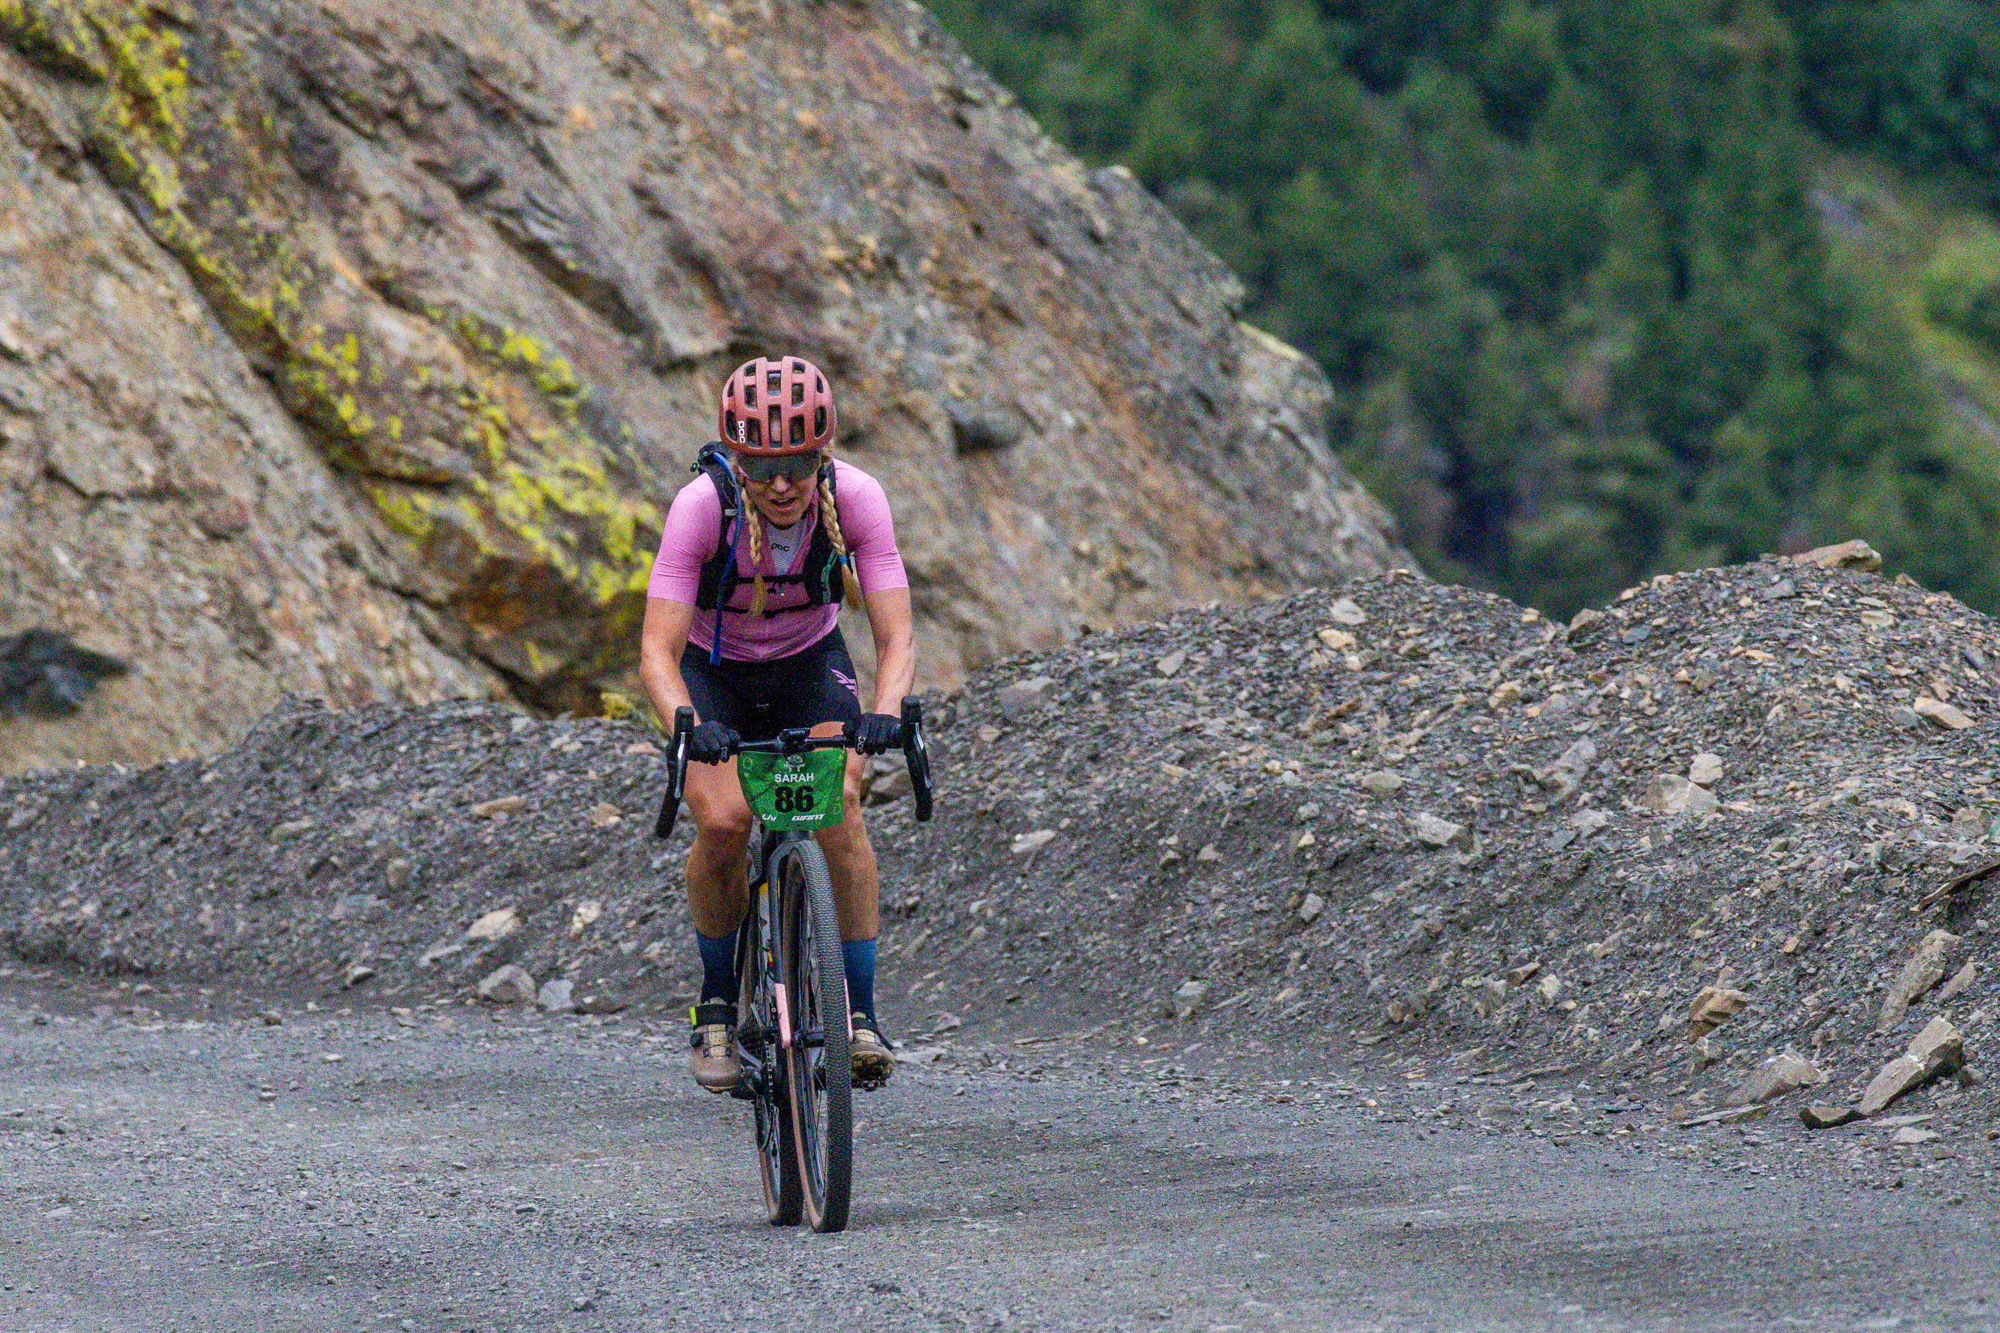 Rebecca’s Private Idaho QSR Race Winners Crowned